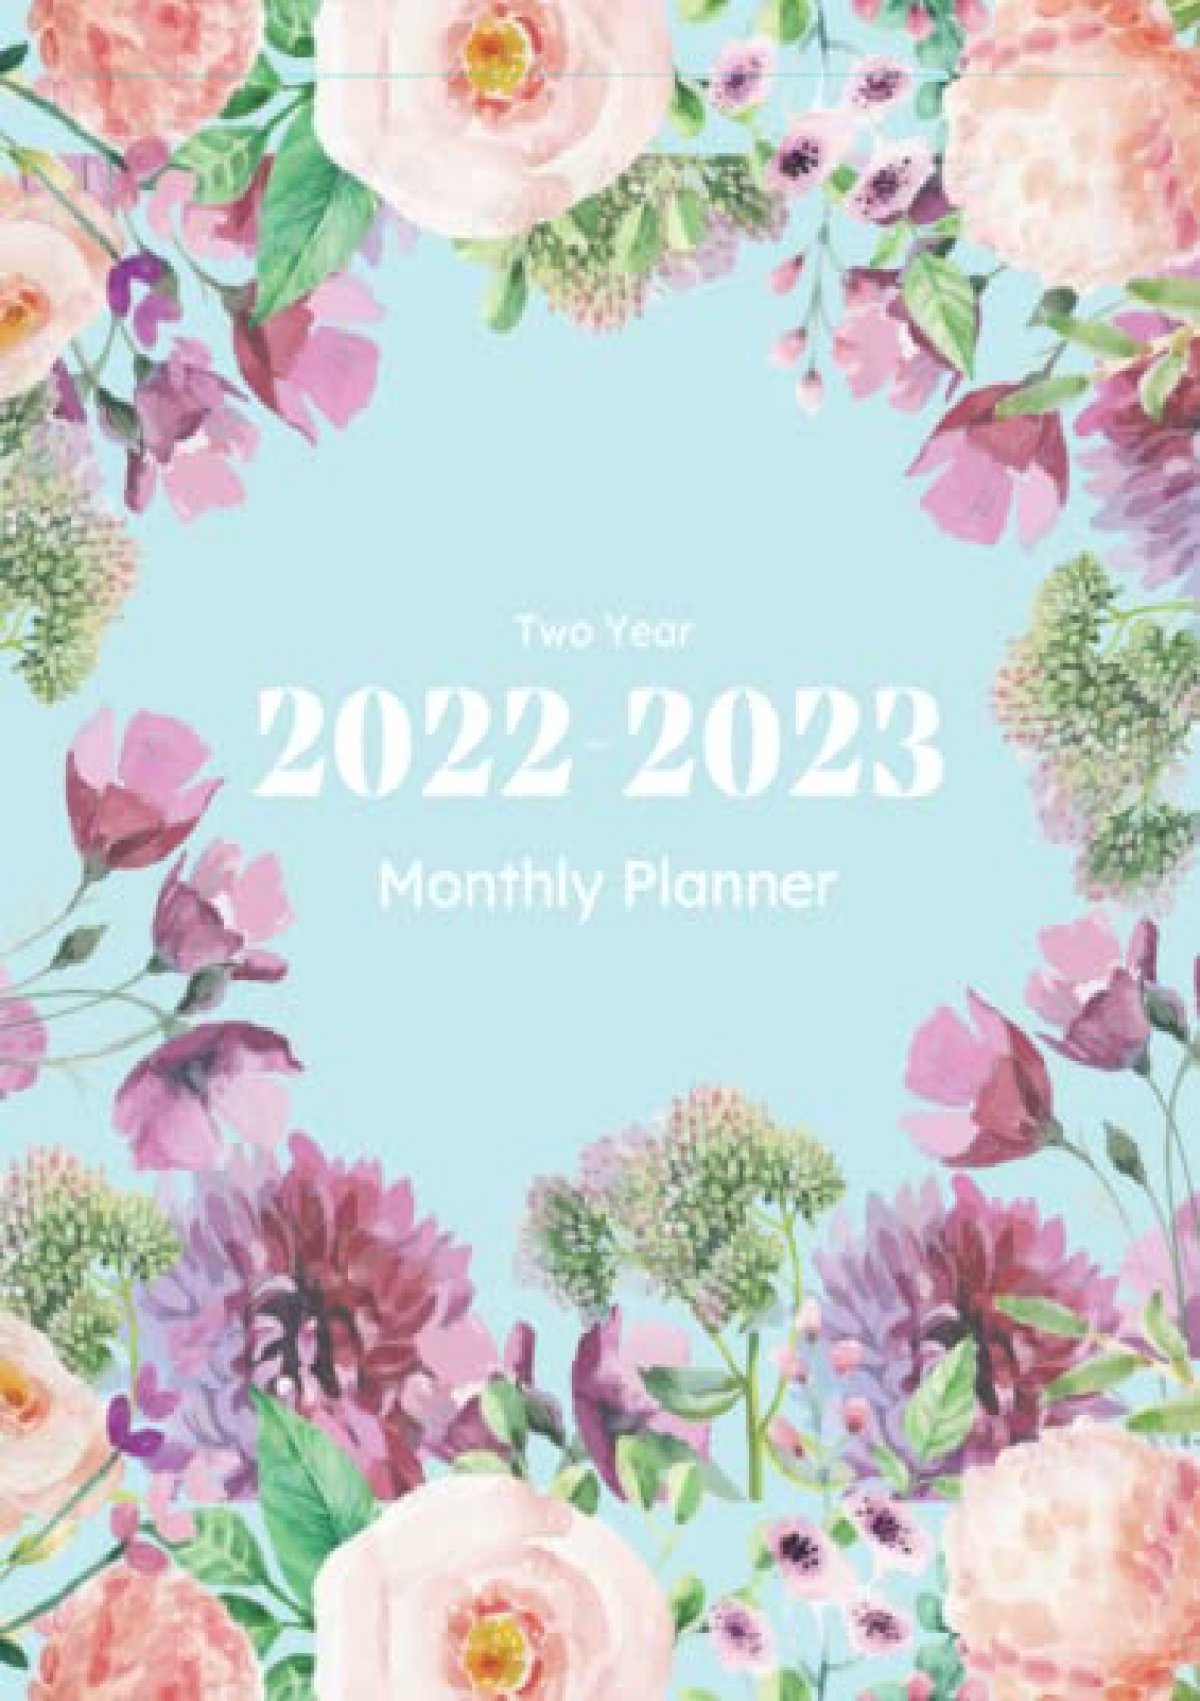 Download⚡️pdf ️ Two Year 2022 2023 Monthly Planner See It Bigger 